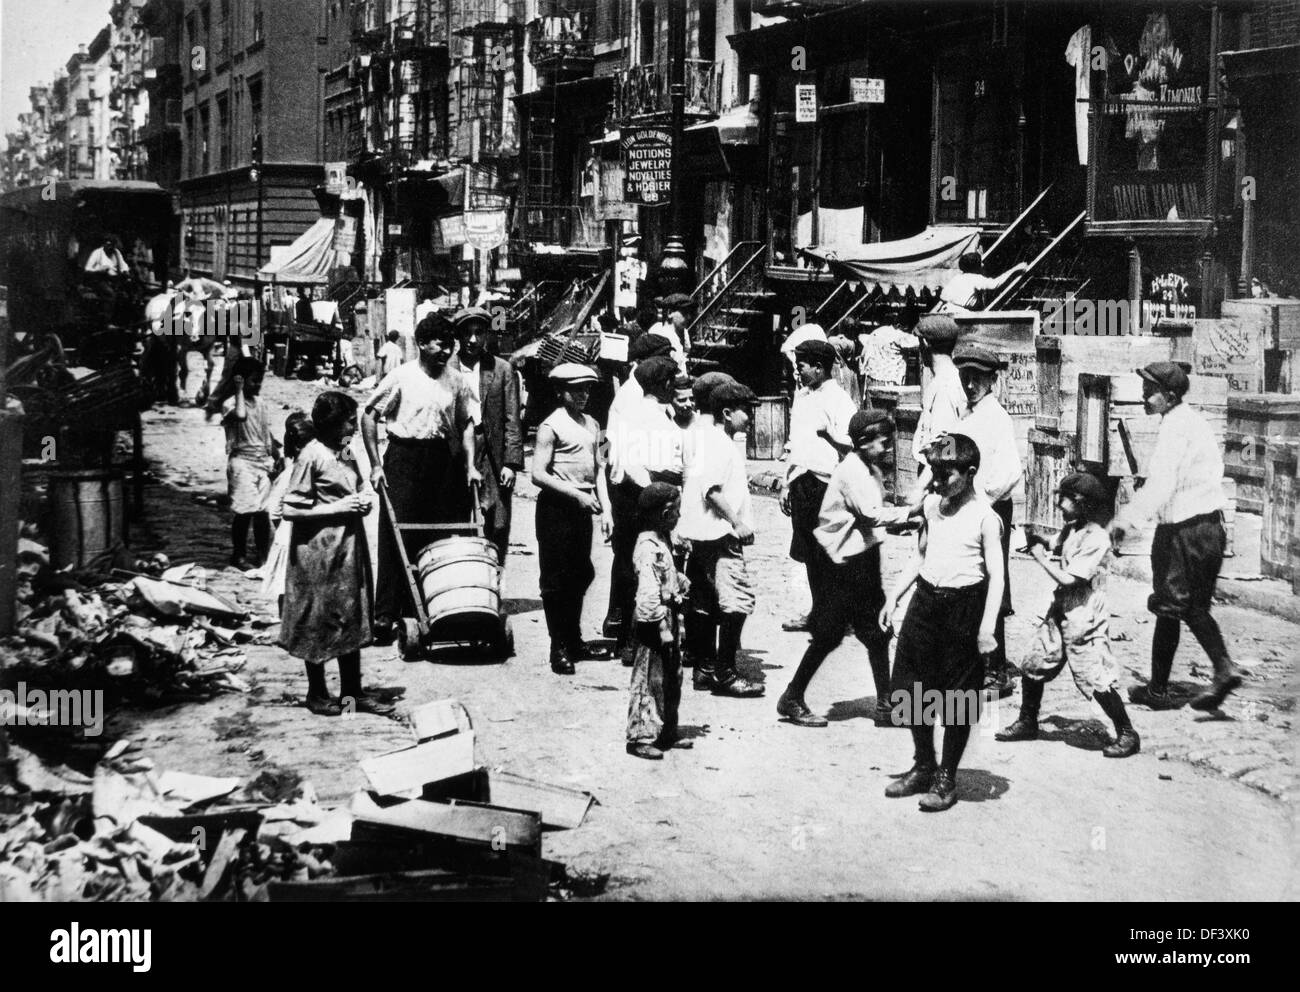 A History of the Lower East Side